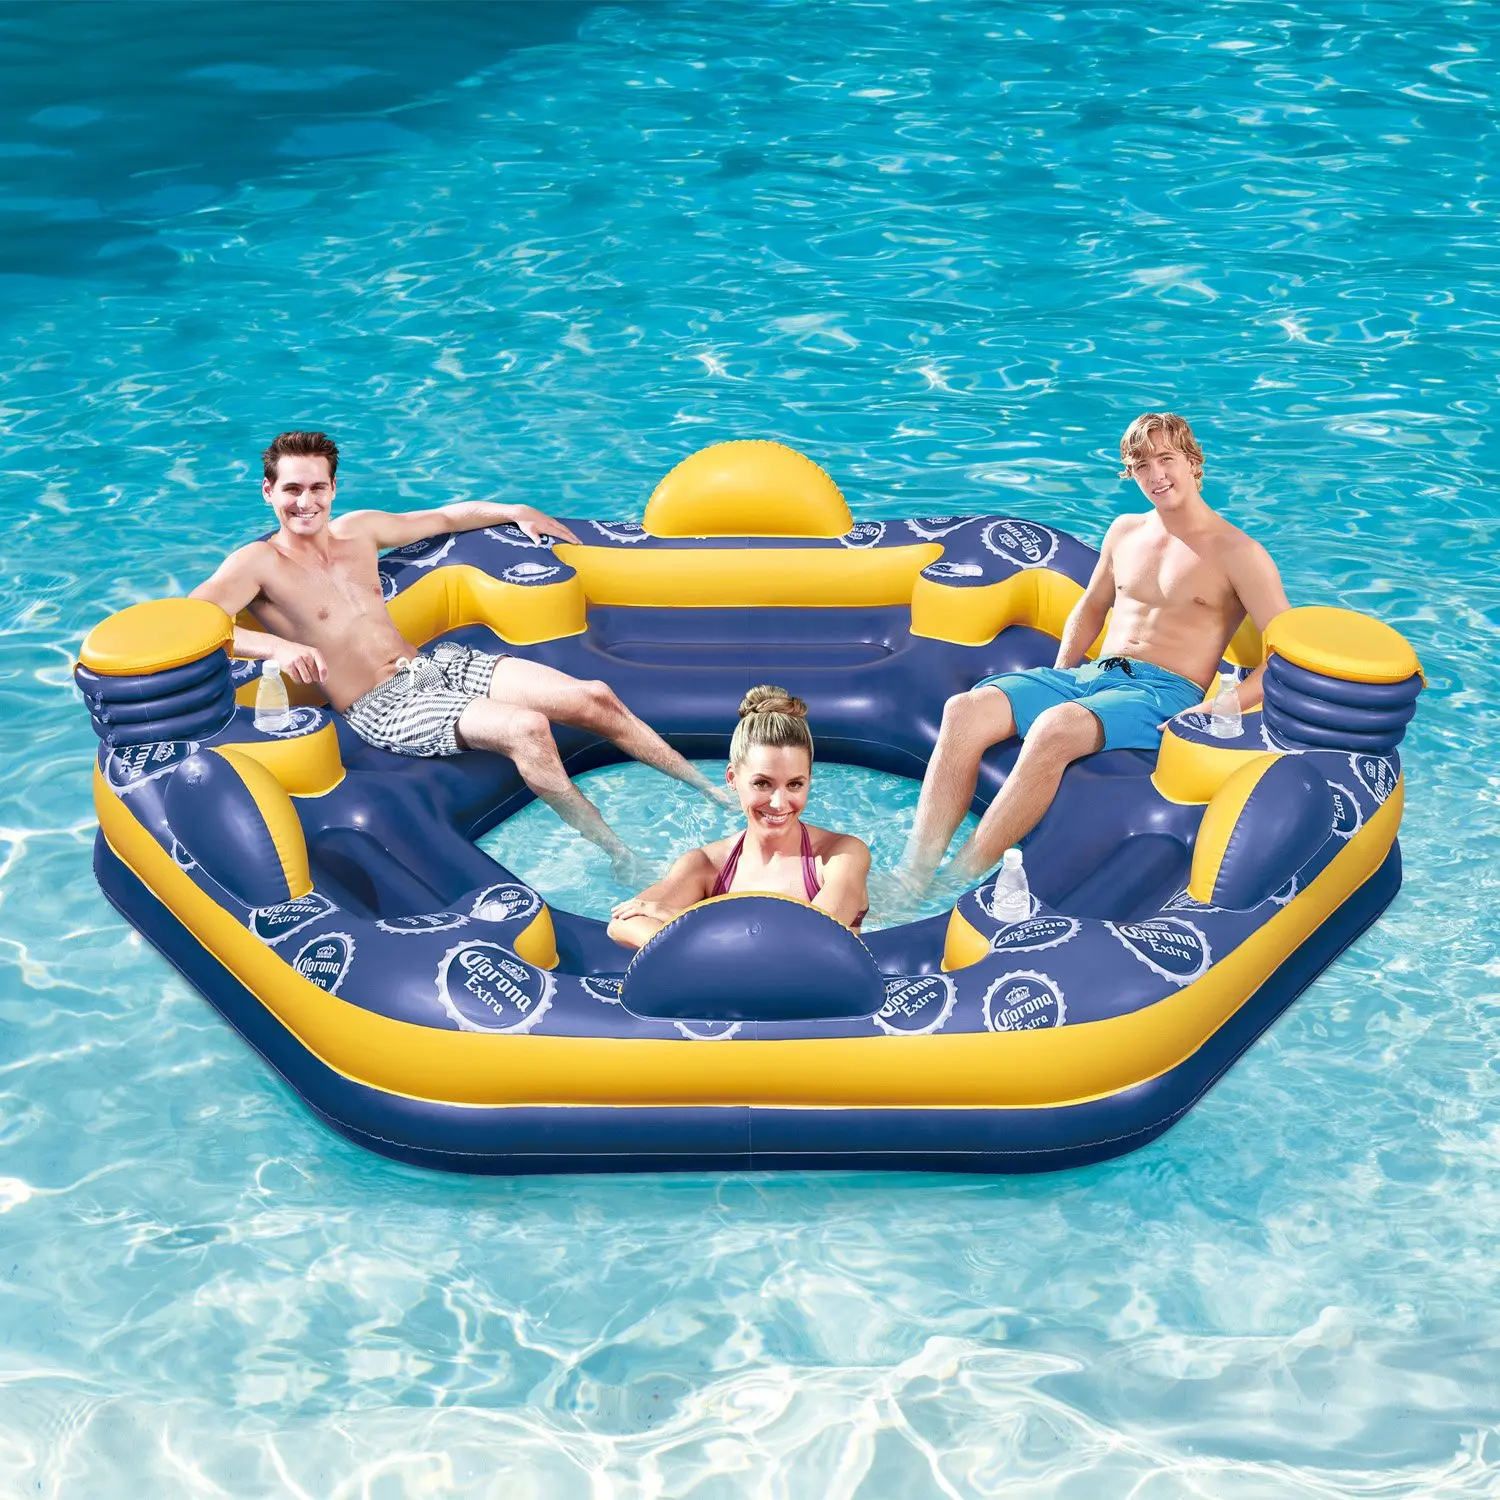 Buy Inflatable 6 Person Pool Raft Floating Island W 2 Built In Coolers